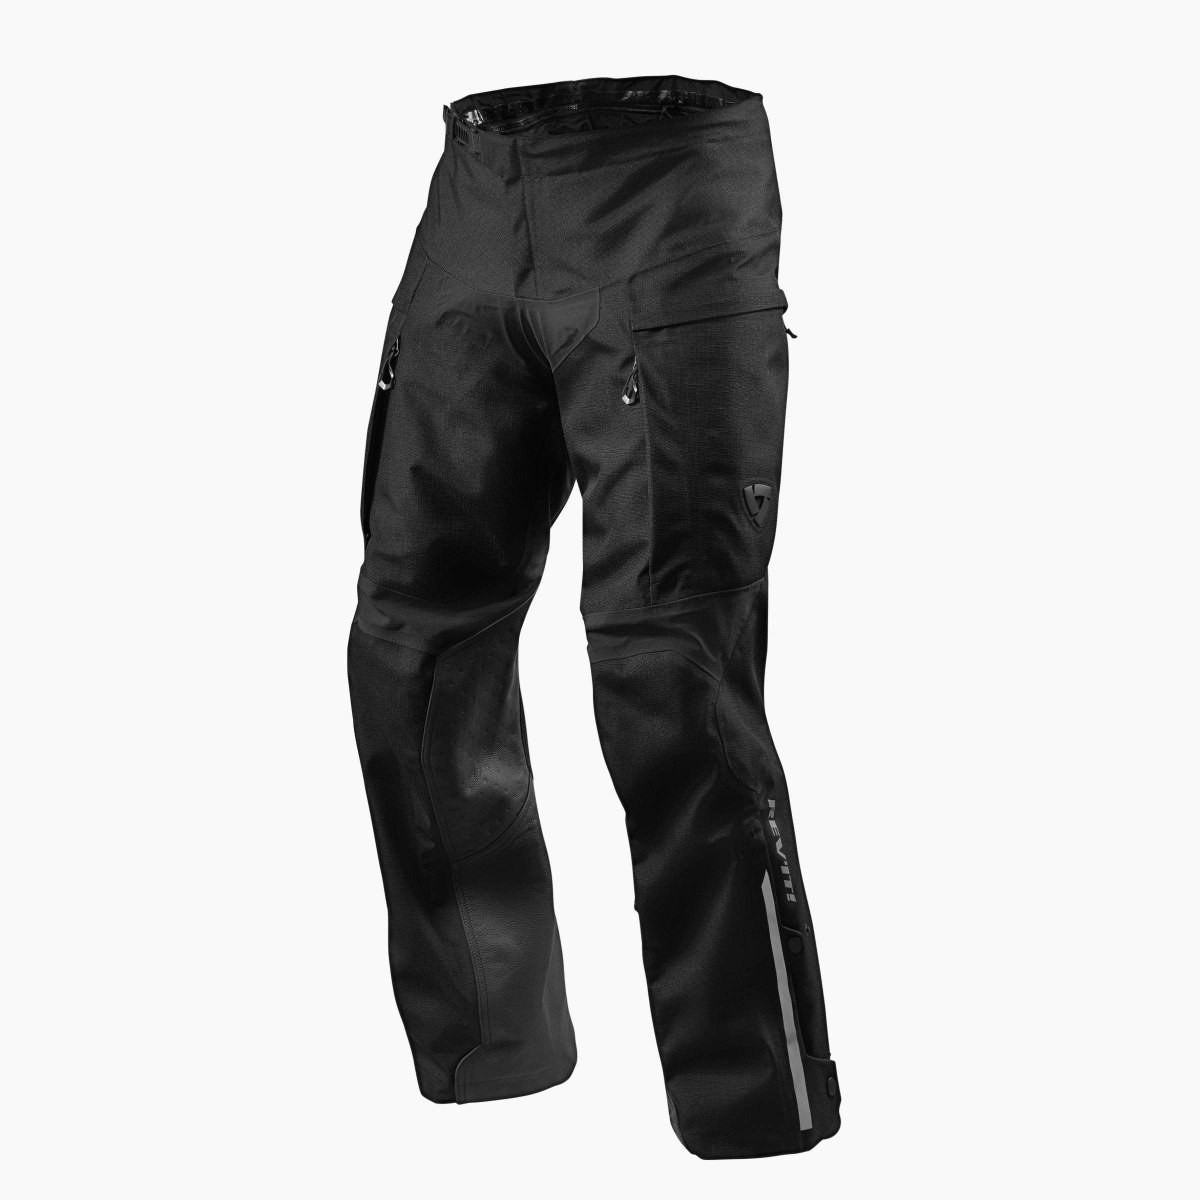 Image of REV'IT! Component H2O Standard Black Motorcycle Pants Size XL ID 8700001317672